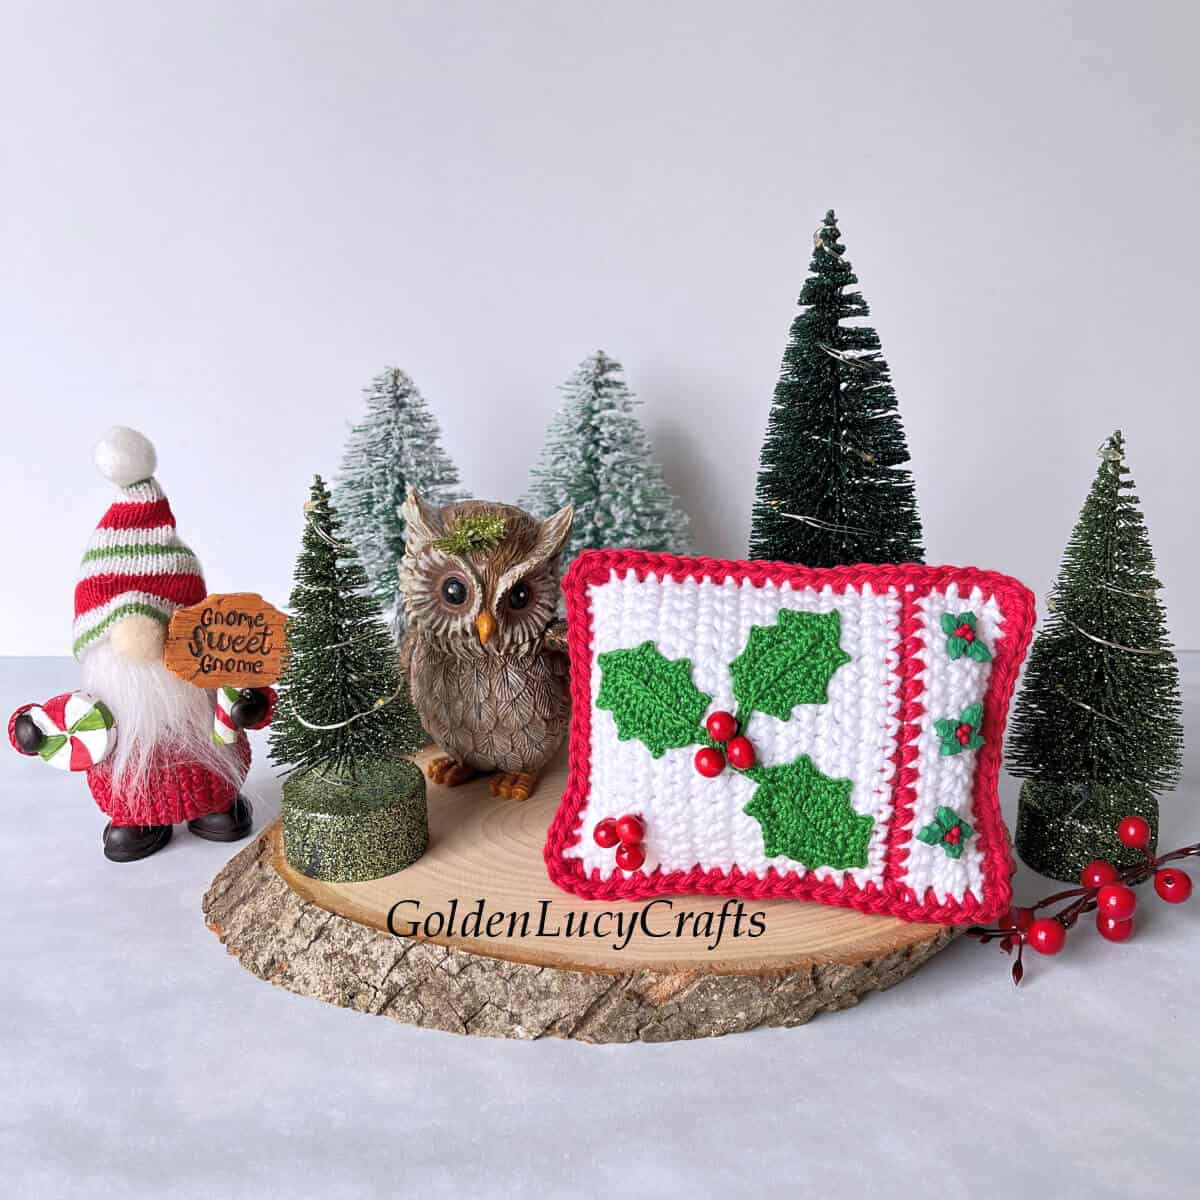 Crochet mini pillow, small Christmas trees, owl and gnome small toys.